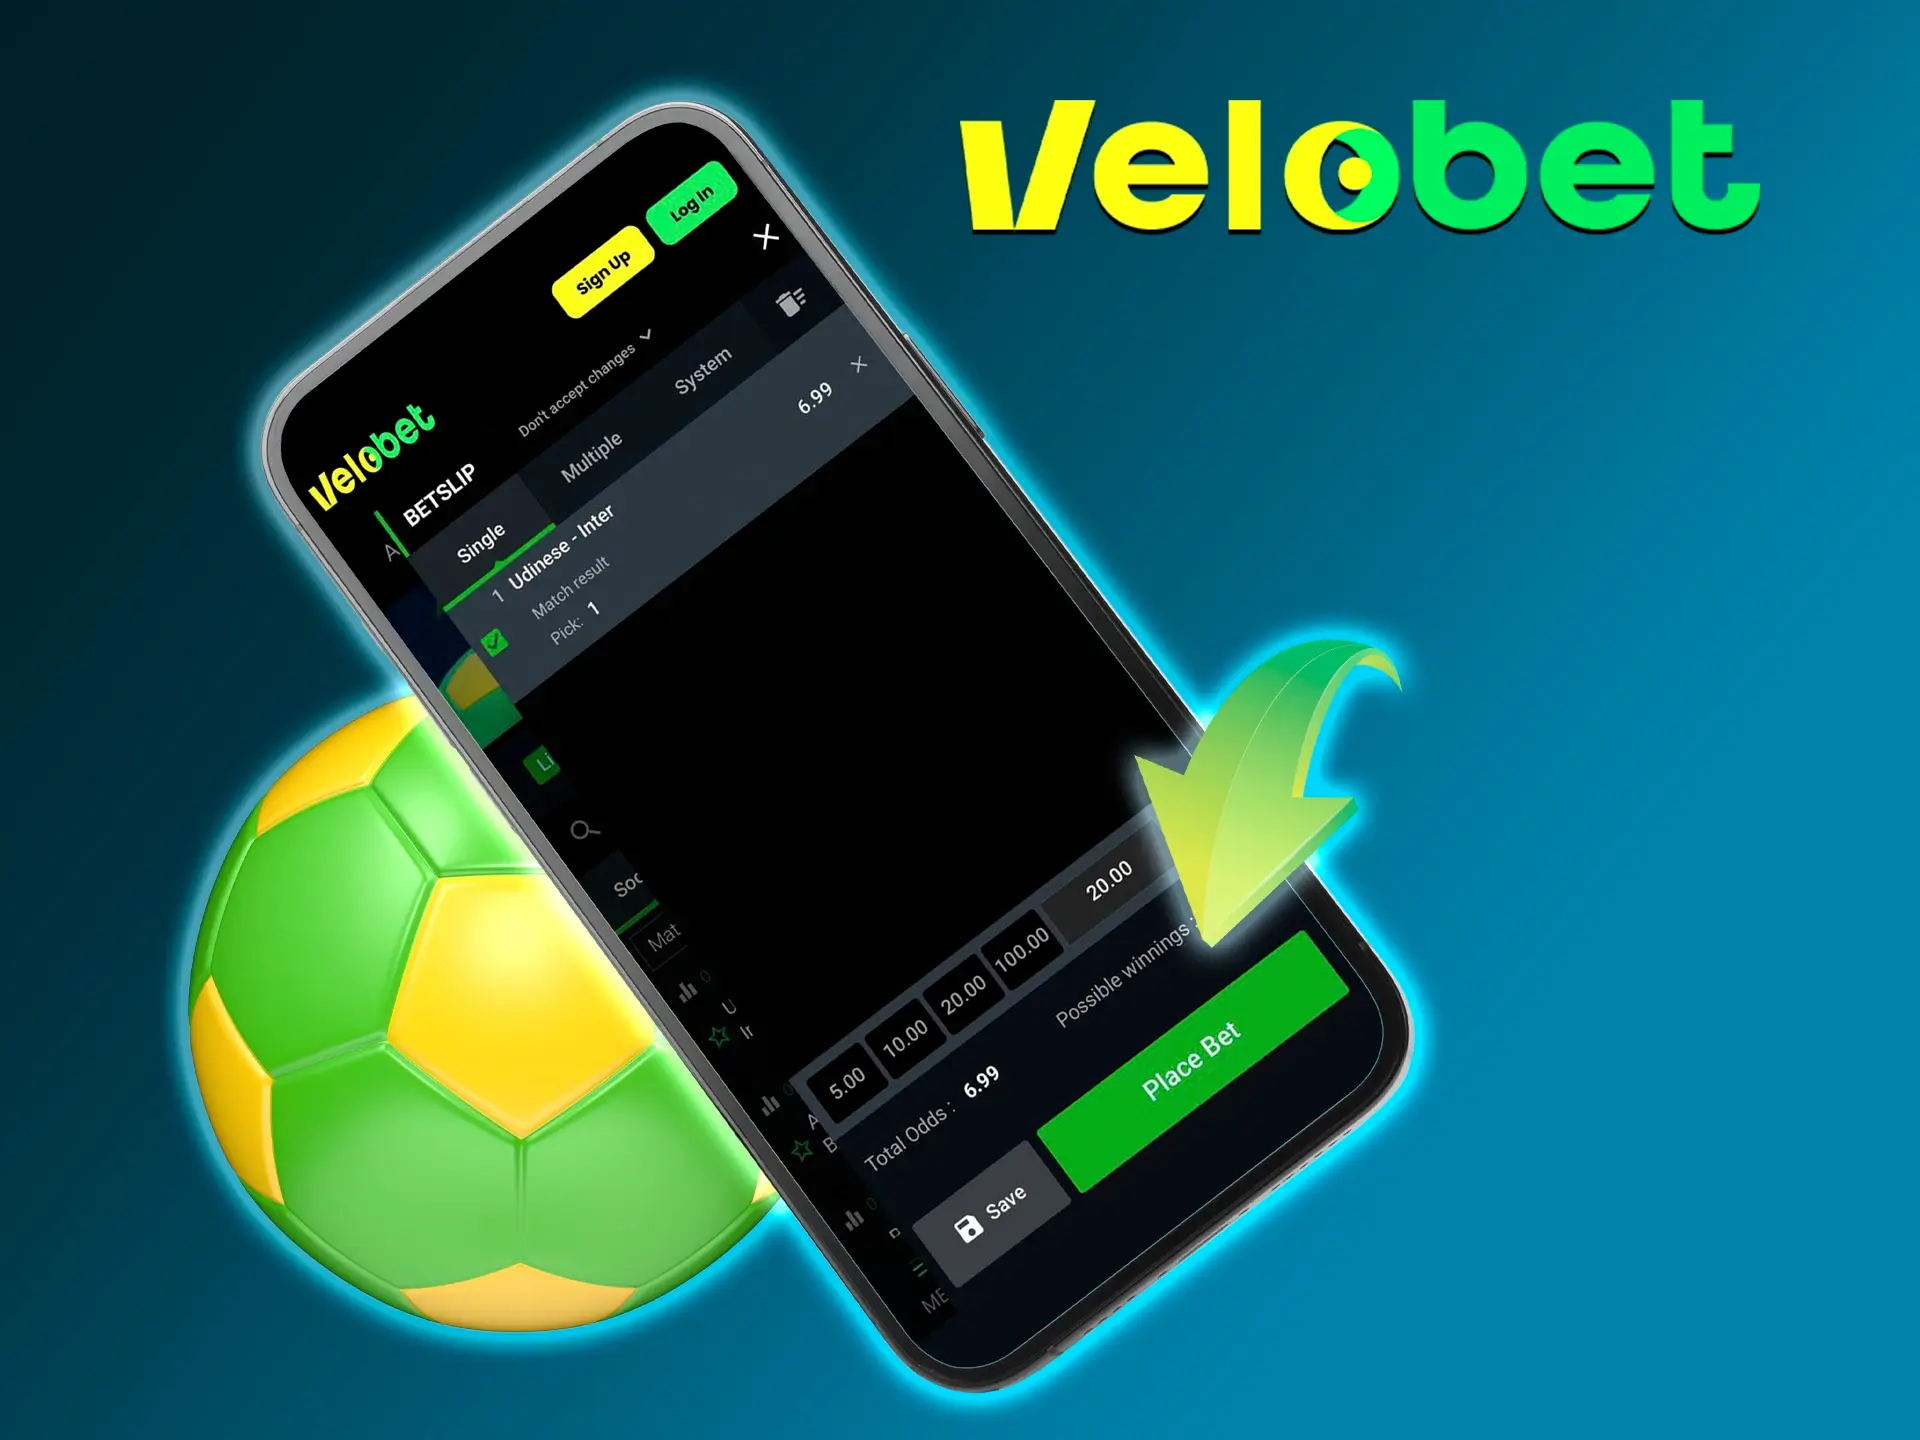 Place your bets on the Velobet app and enjoy the emotion of winning.